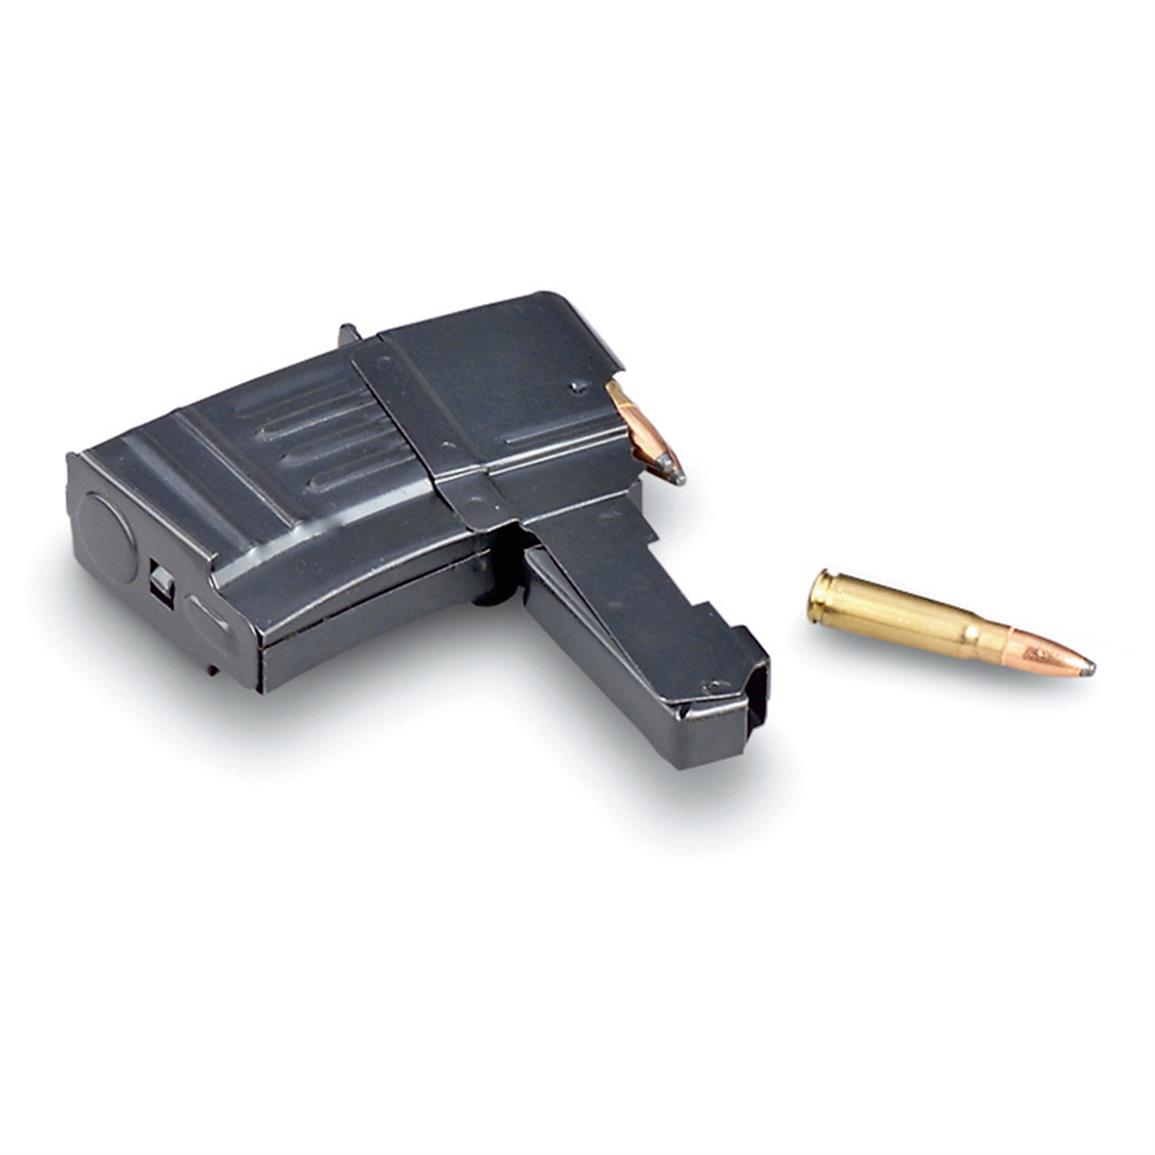 SKS 5-rd. Detachable Mag - 80903, Rifle Mags at Sportsman's Guide